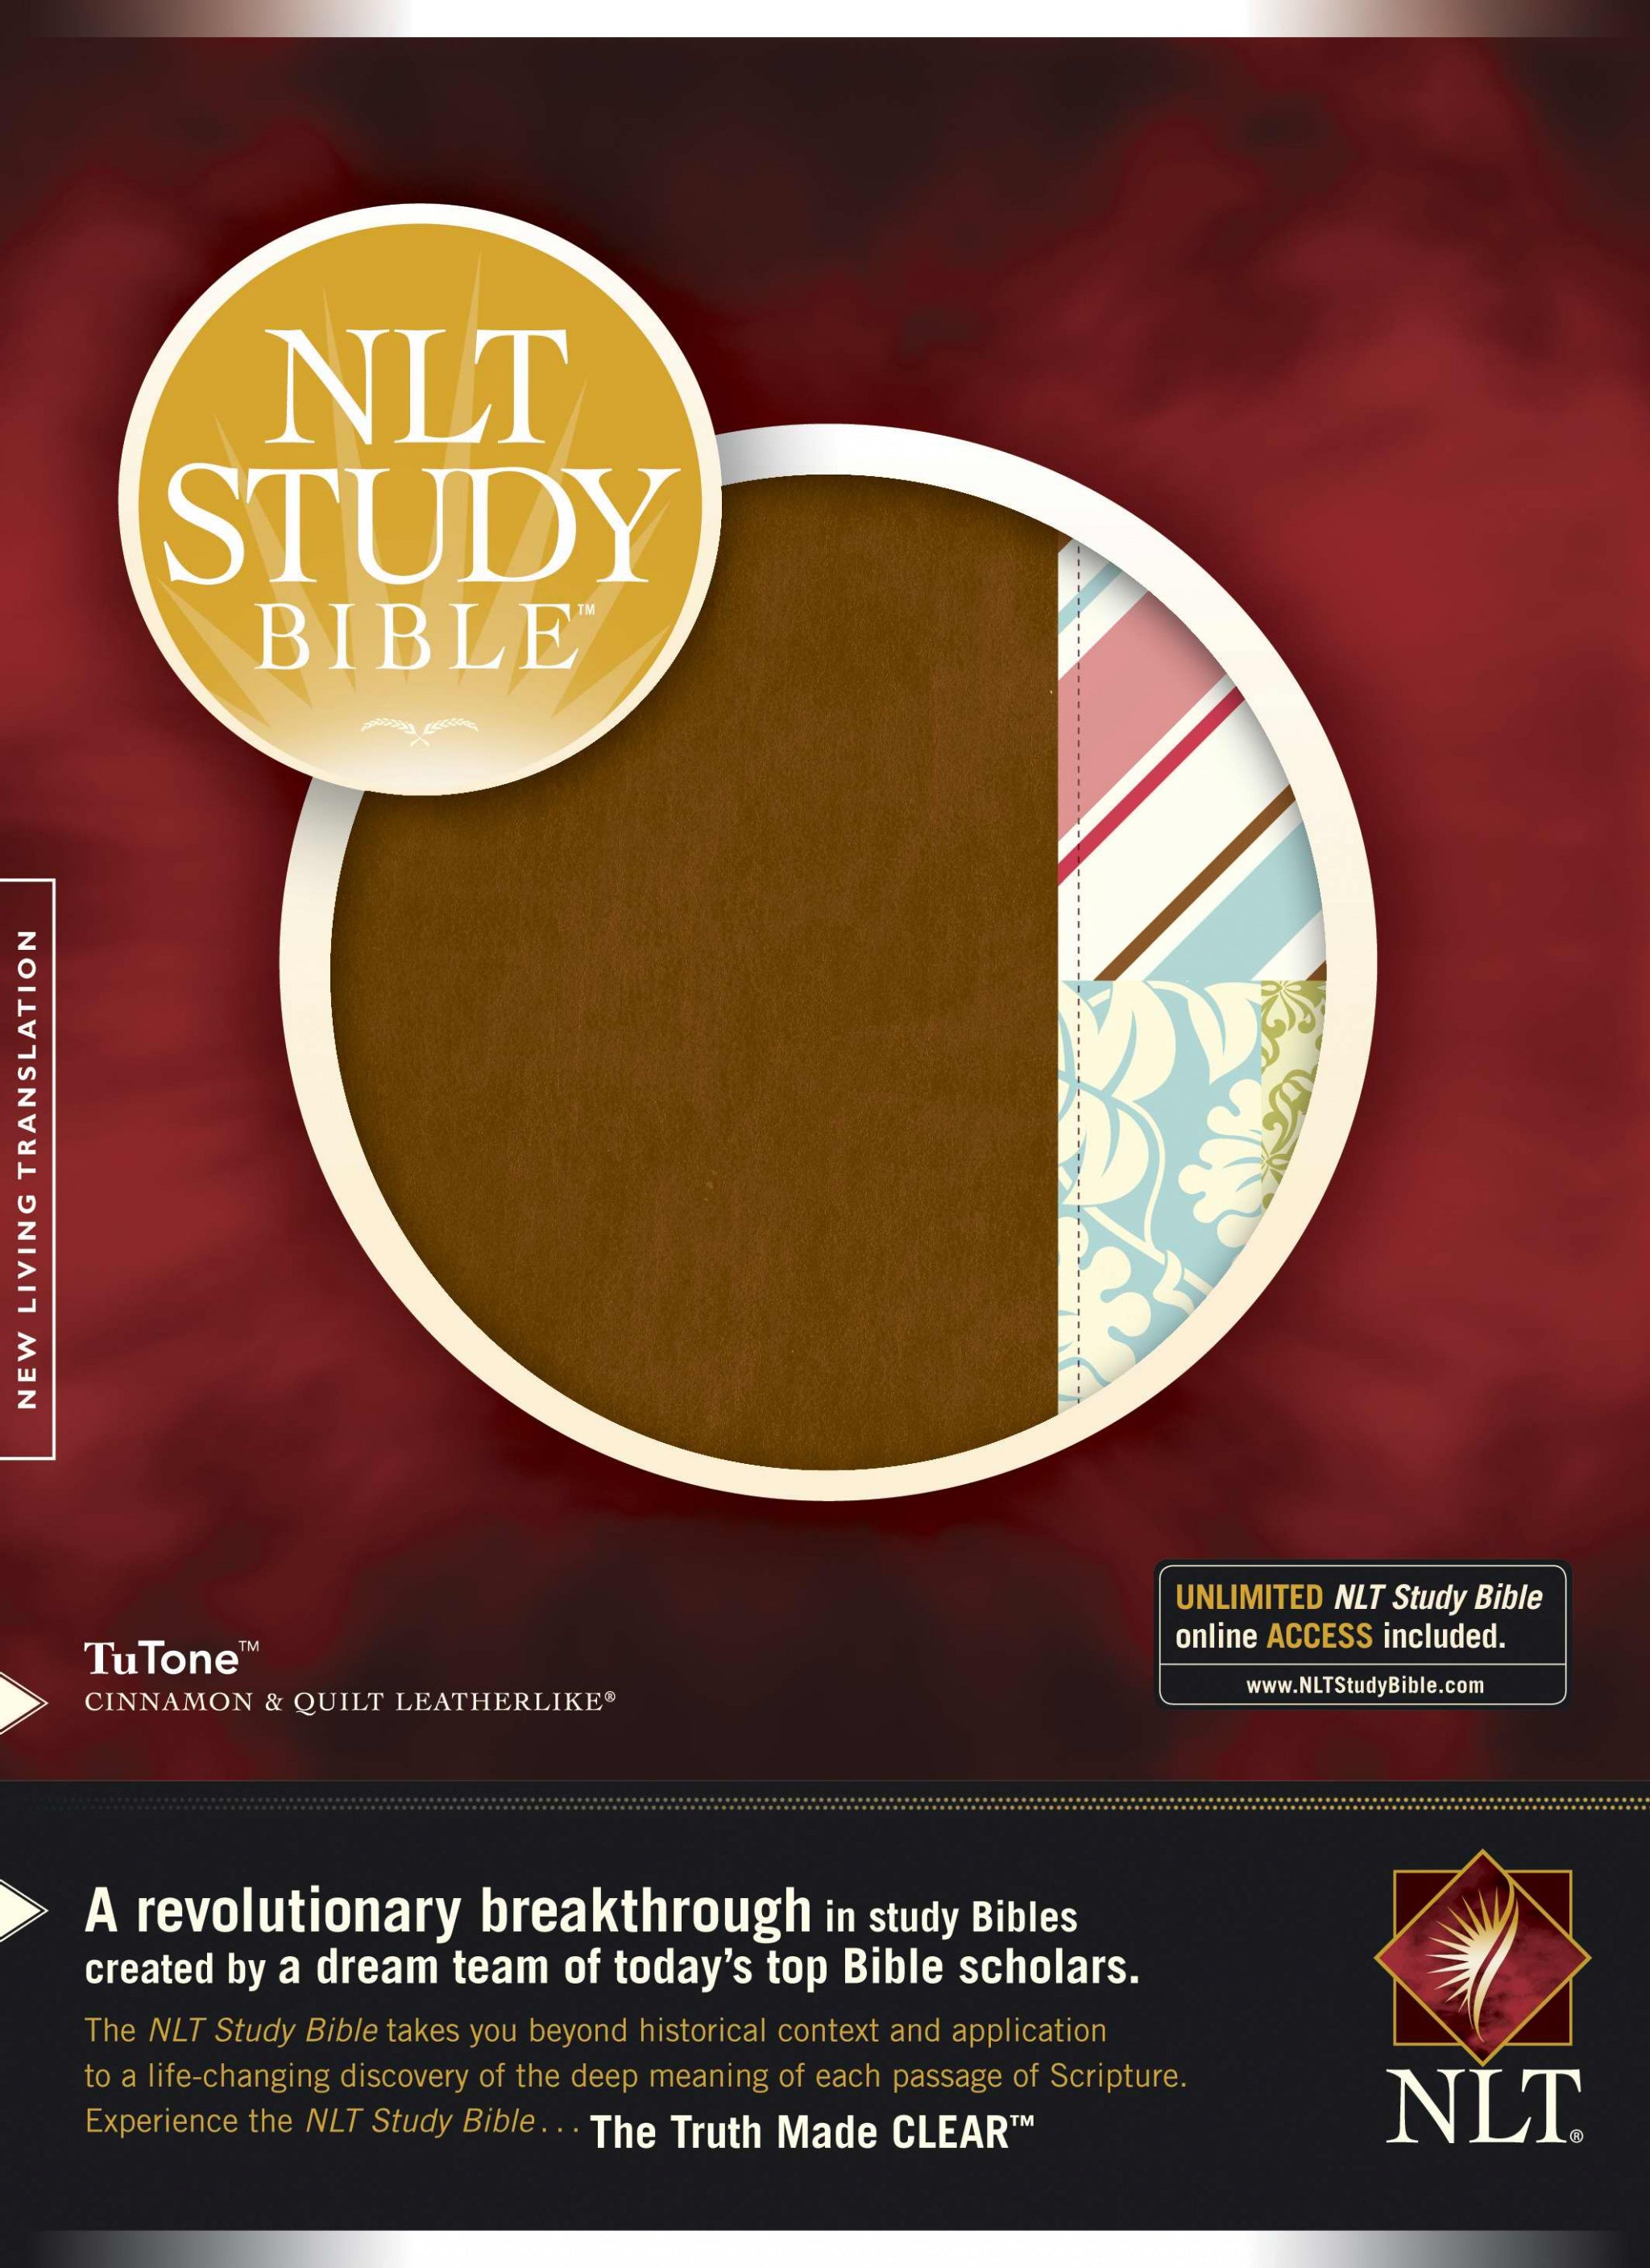 Image of NLT Study Bible other